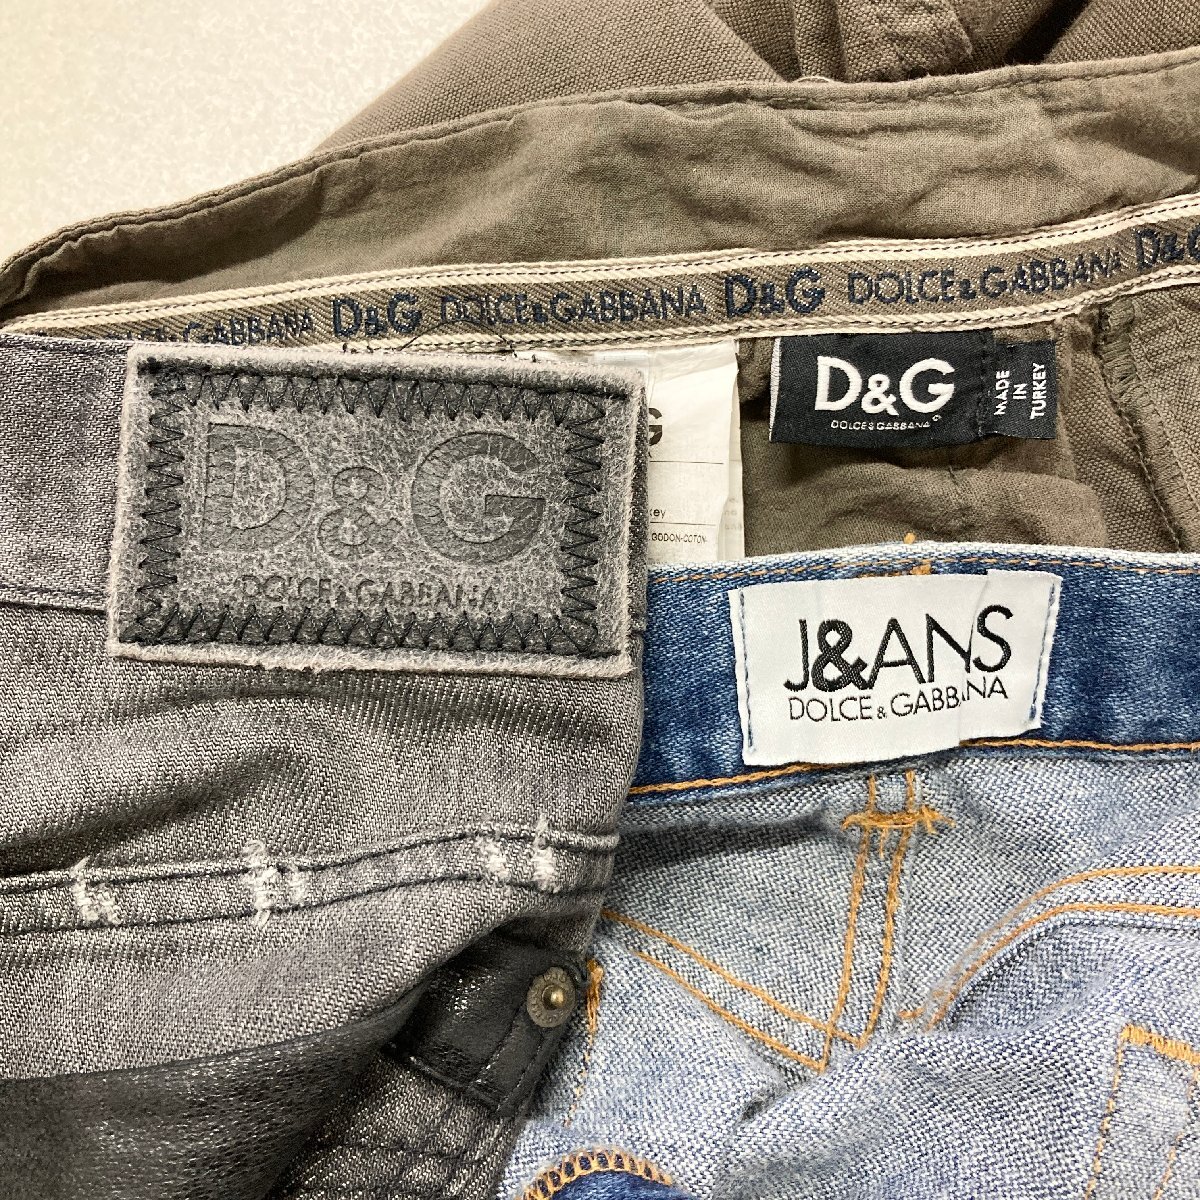 *DOLCE&GABBANA Dolce and Gabbana 3 point pants Denim button fly Italy made Turkey made men's size MIX. present condition goods 1.67kg*